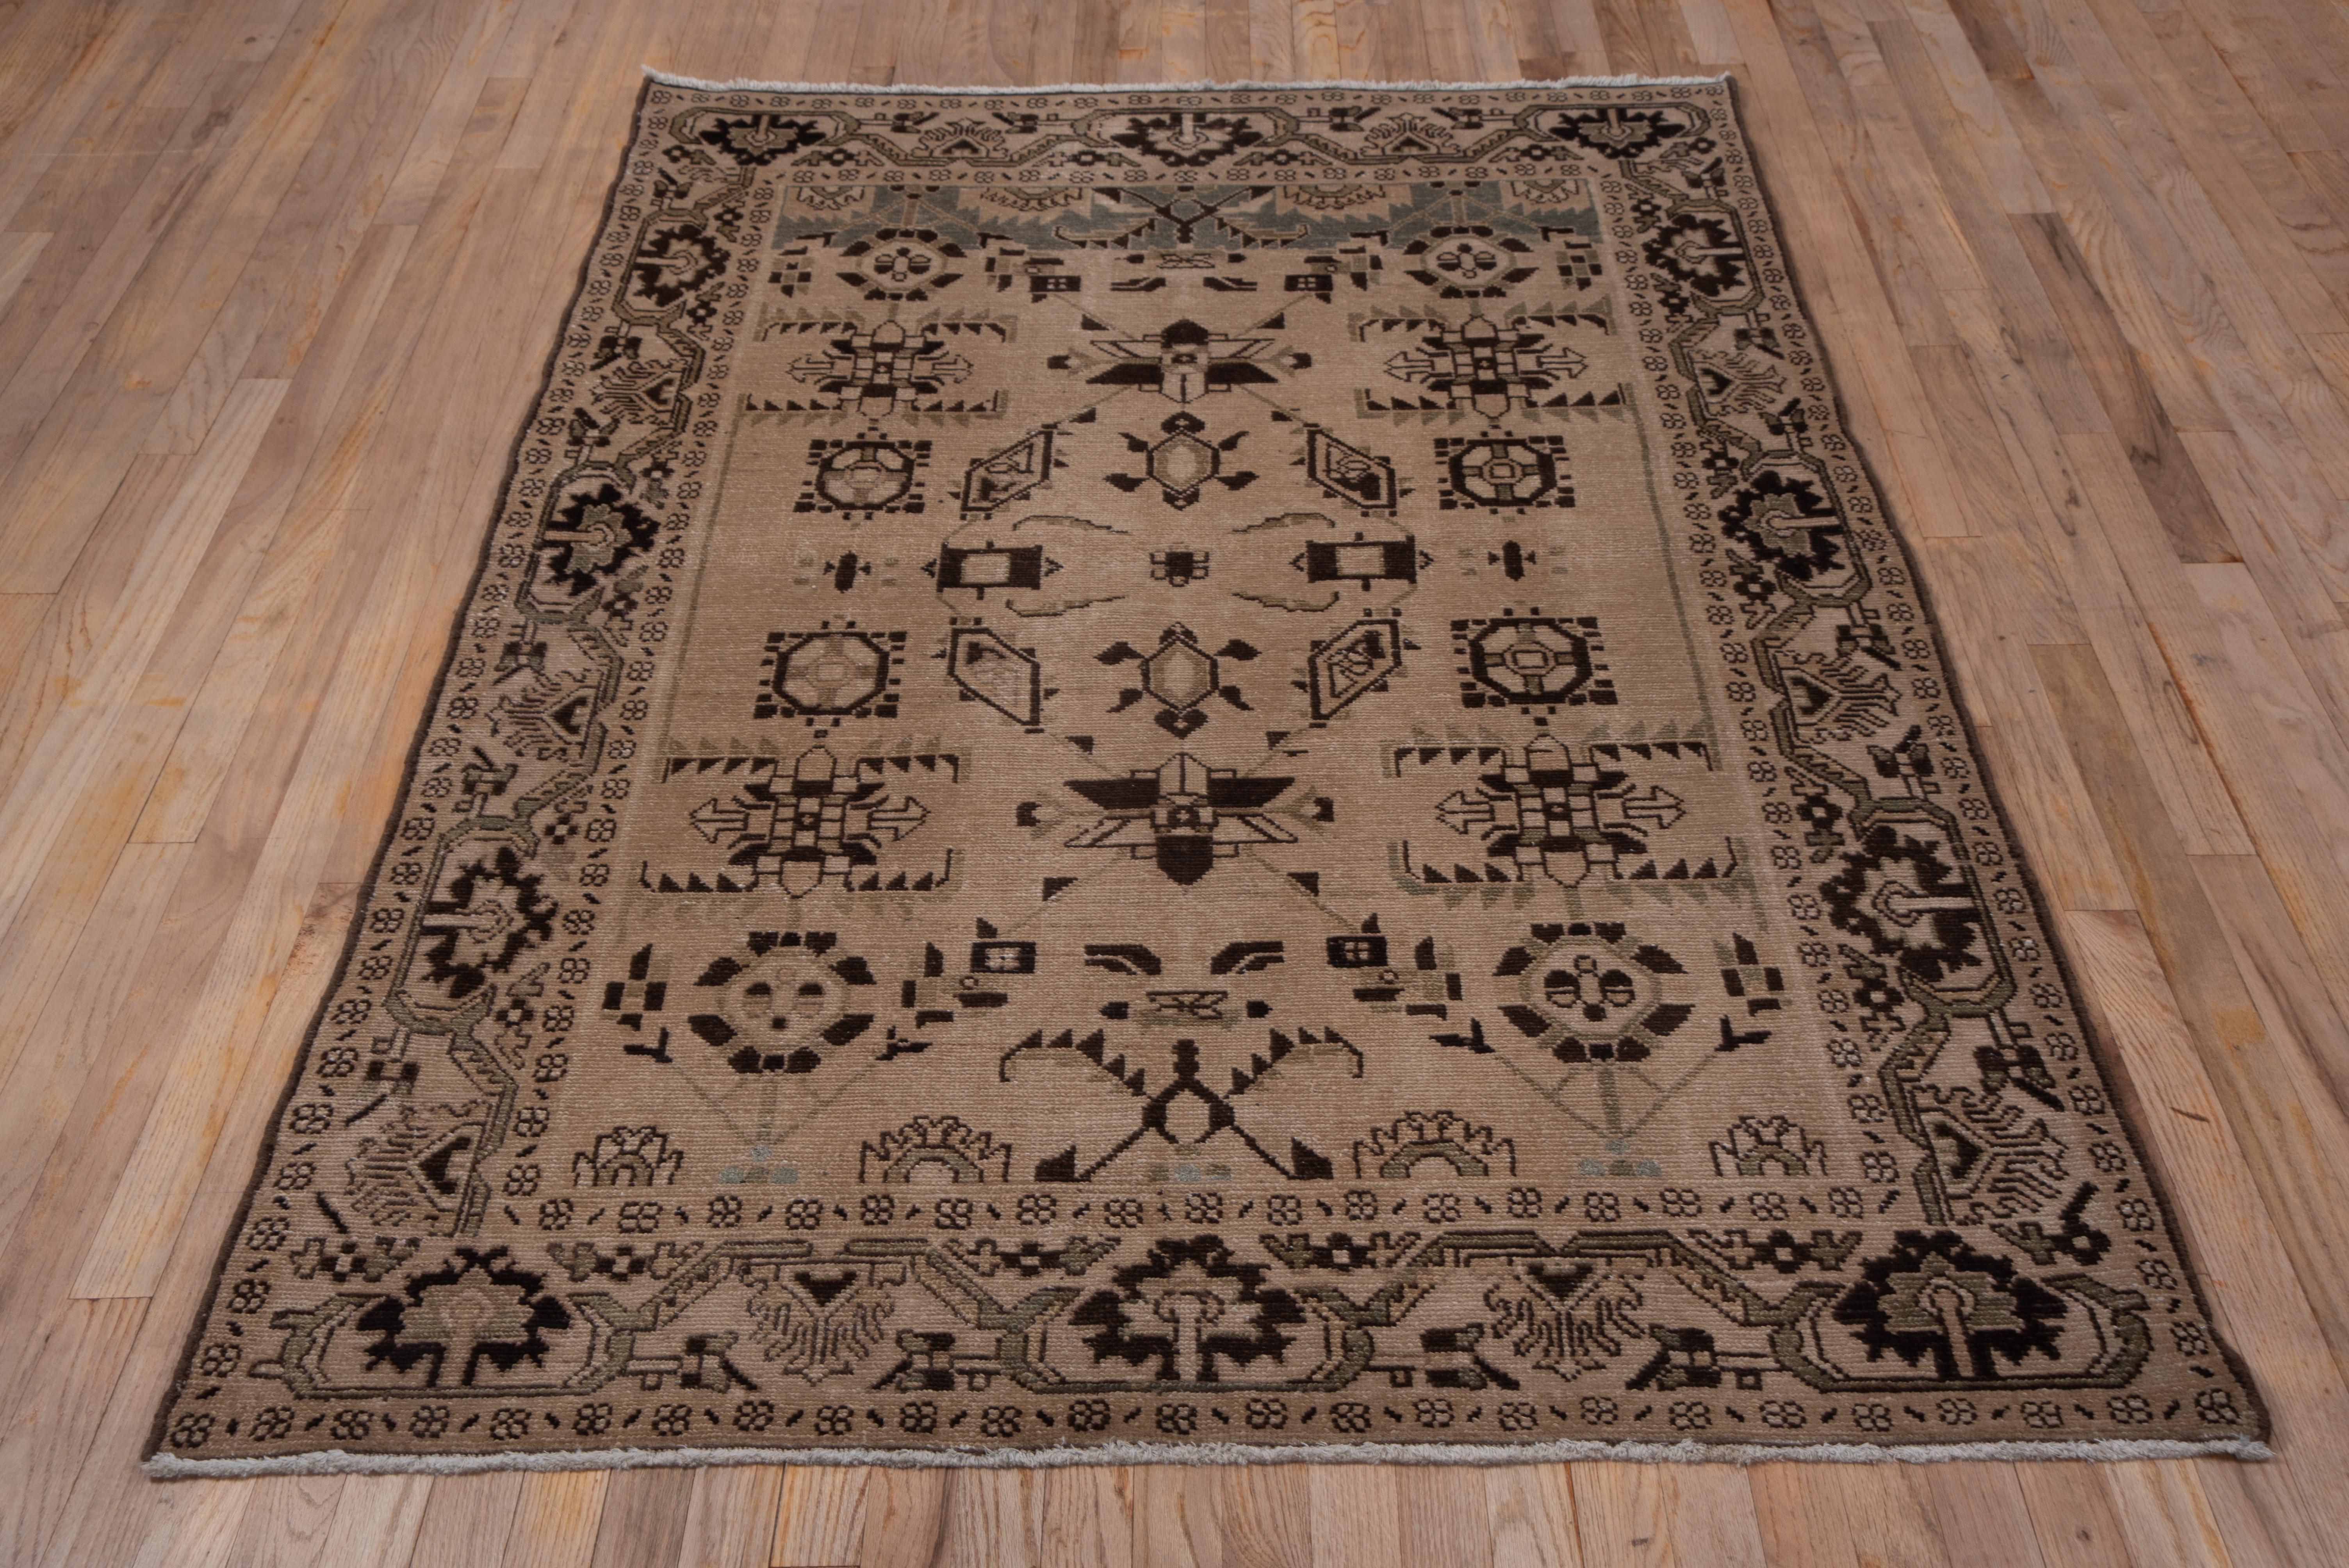 The sand field abrashes to graphite at one end, but features the classic west Persian Malayer village pattern of octagons, squares, diagonal shapes and hexagramme stars, with strong accents in dark brown. The sand border of this scatter shows ragged